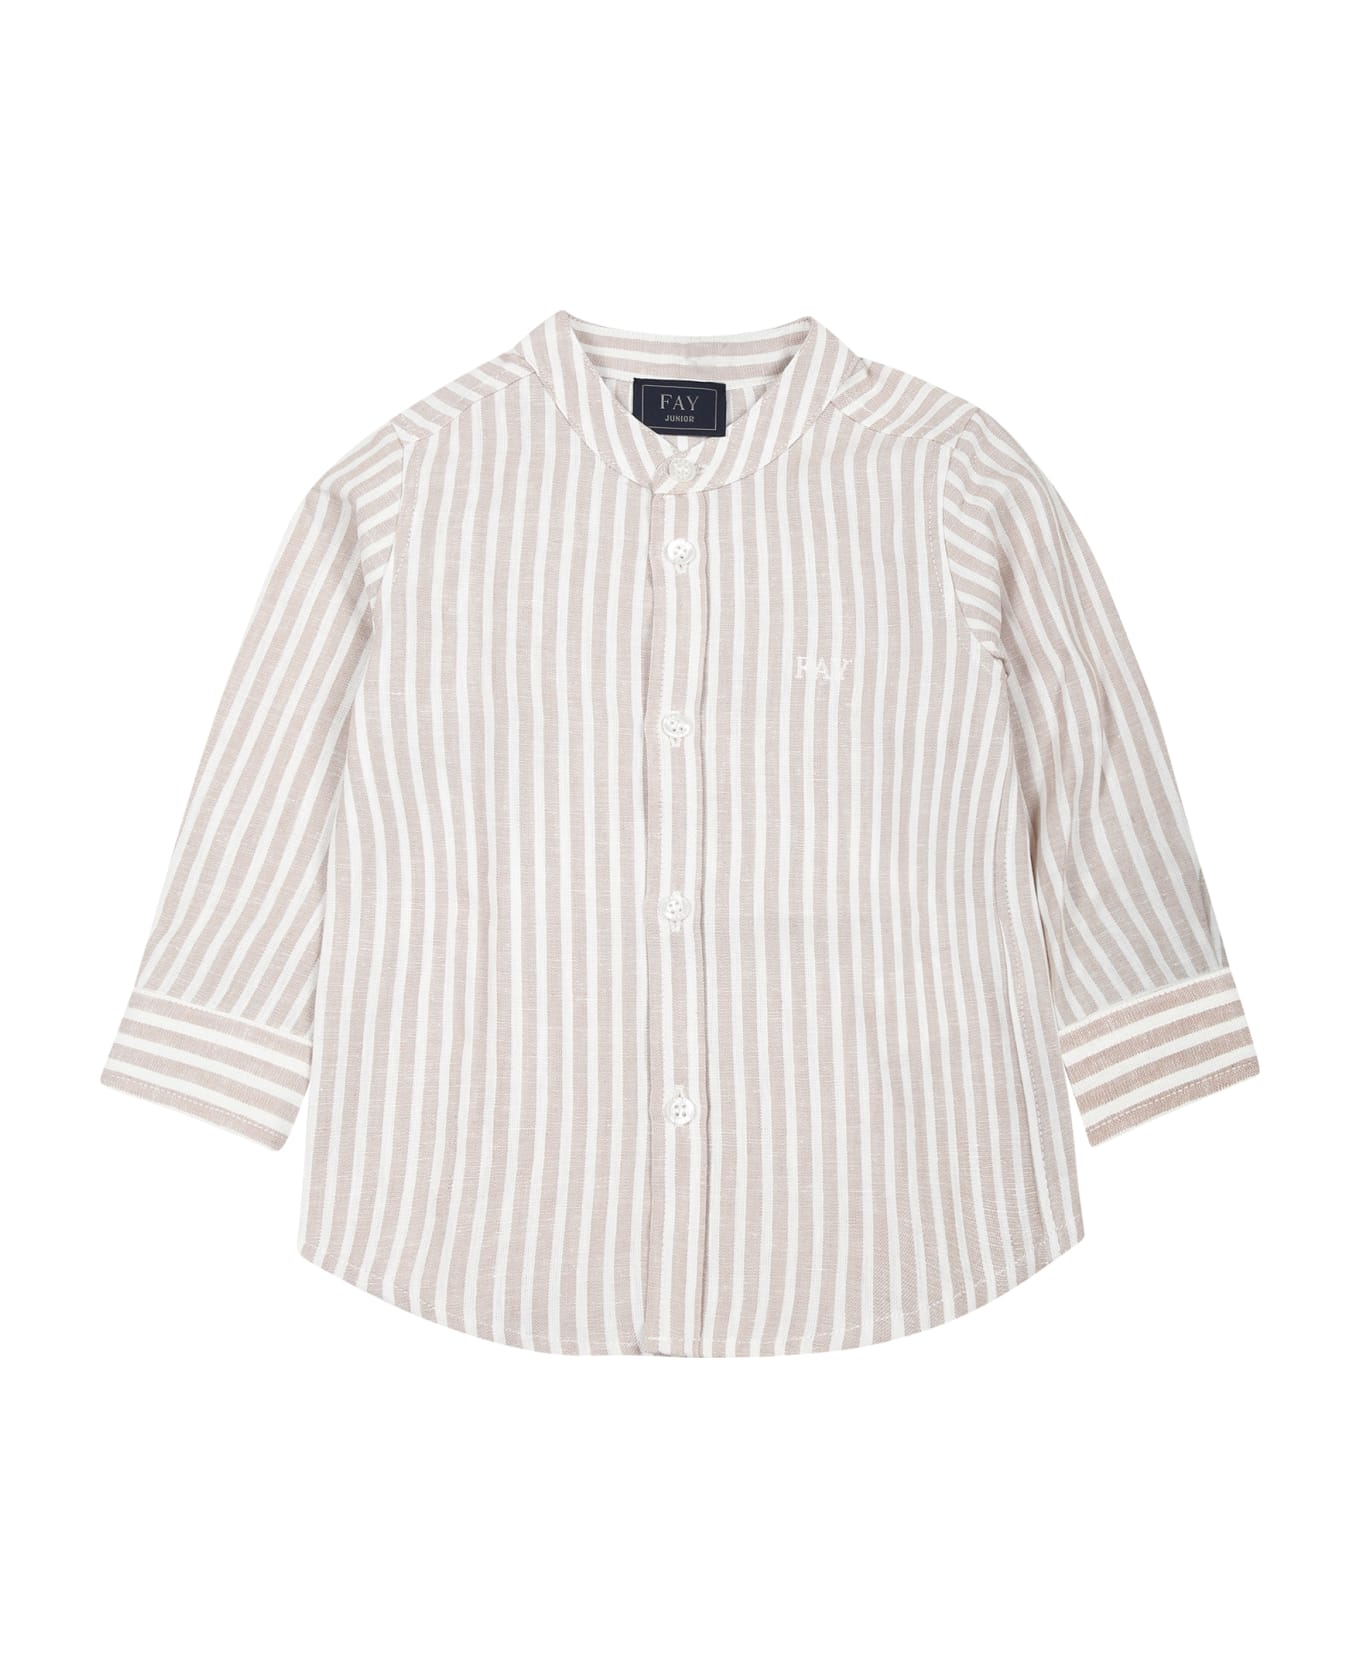 Fay Beige Shirt For Baby Boy With Logo - Beige シャツ